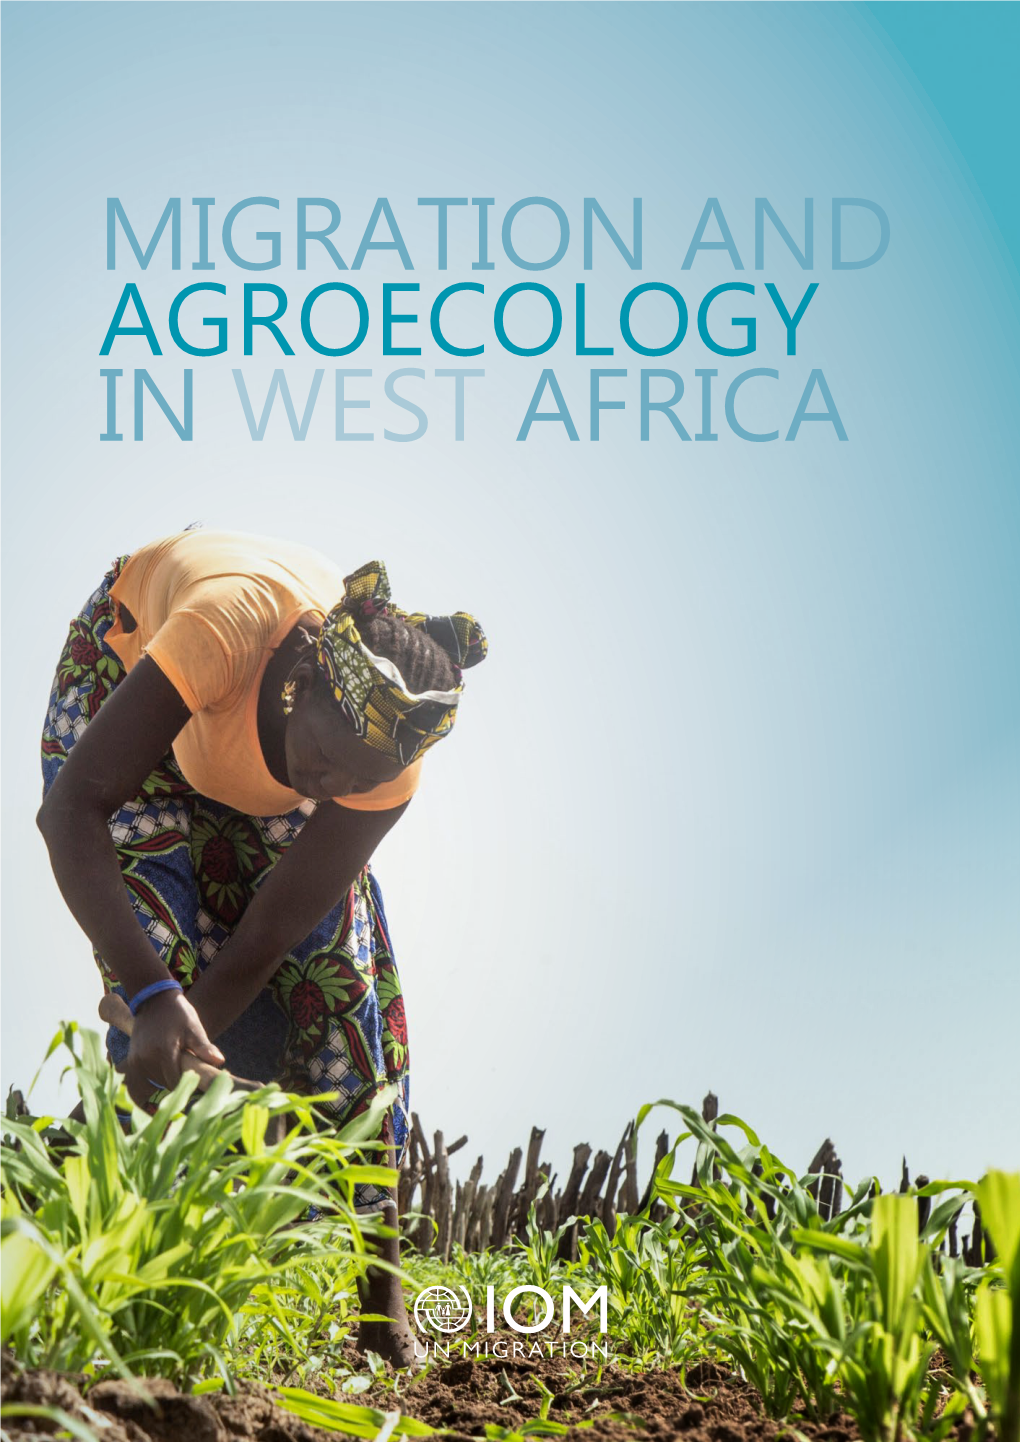 Migration and Agroecology in West Africa